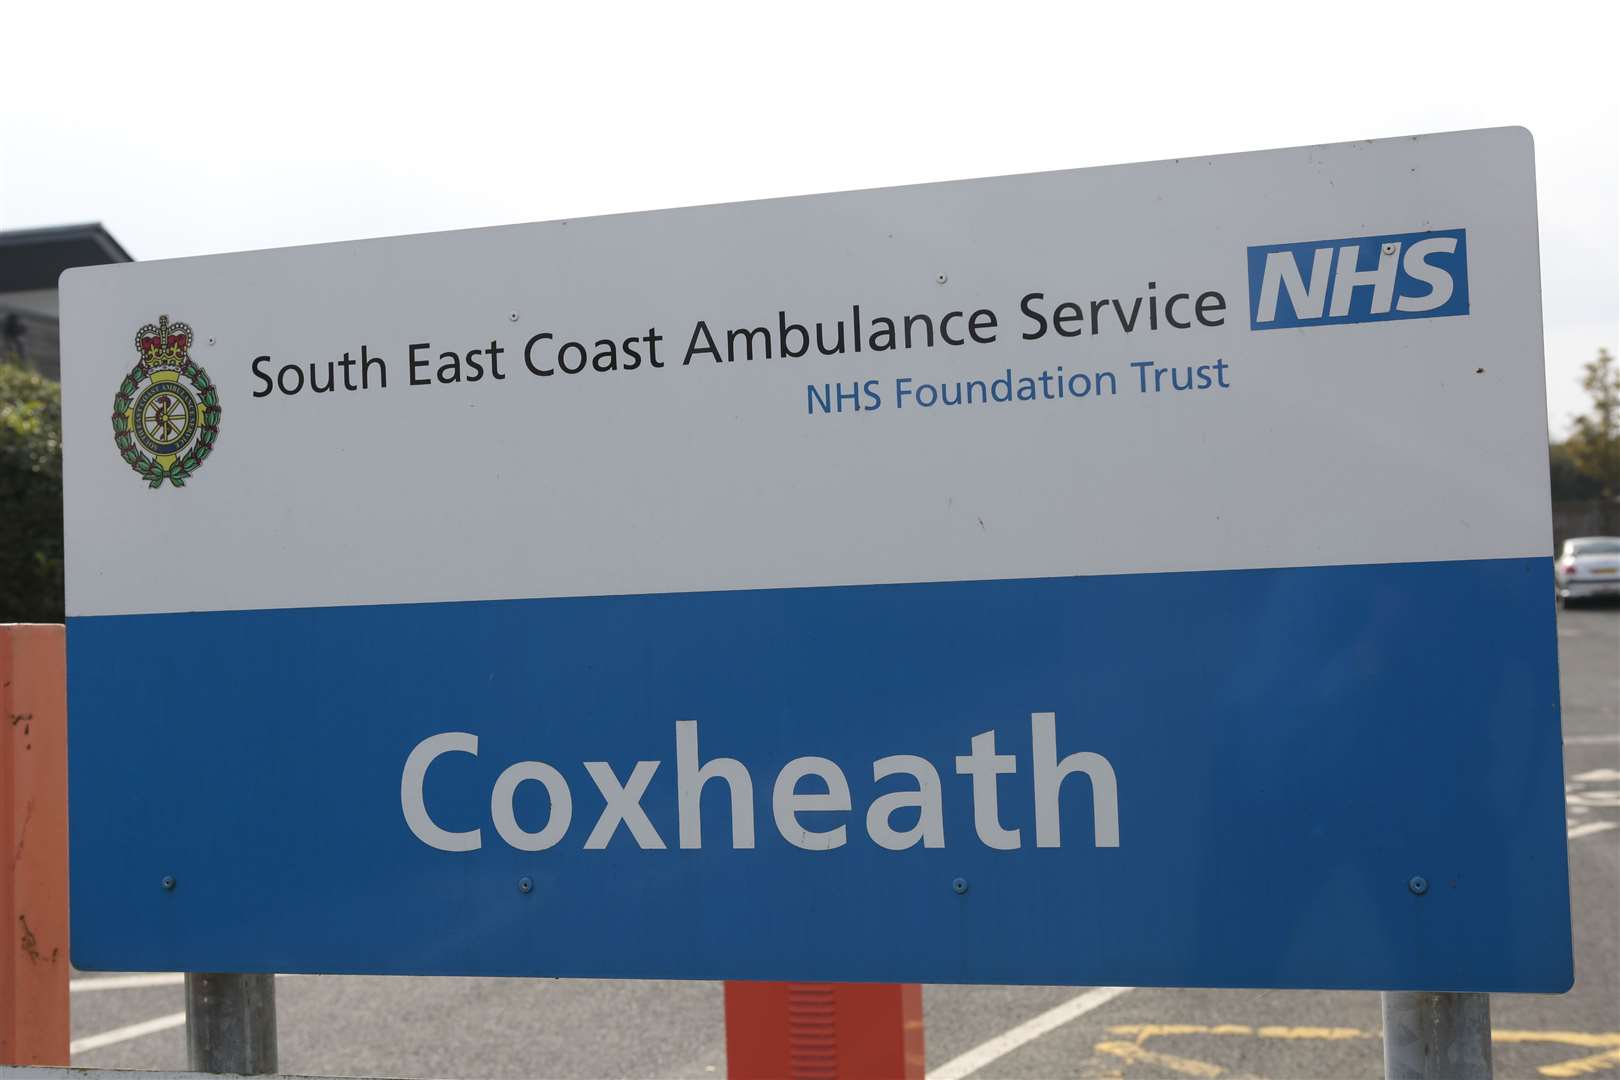 Staff have been moved from the Coxheath site to Crawley or Ashford